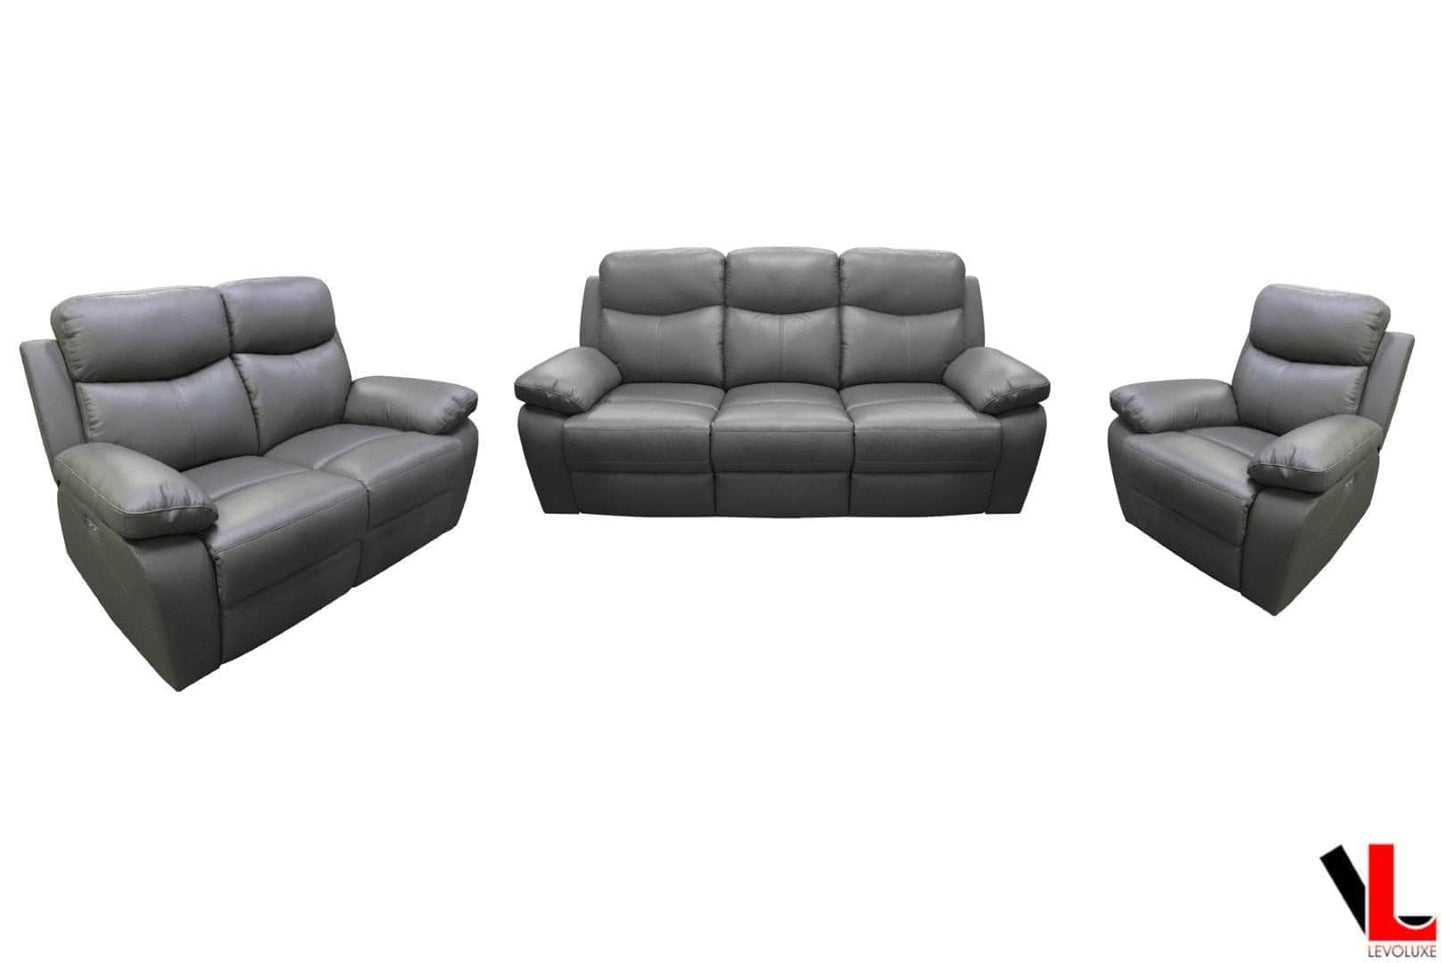 Pending - Levoluxe Grey Aveon 3 Piece Pillow Top Arm Reclining Sofa, Loveseat and Chair Set in Leather Match - Available in 2 Colours